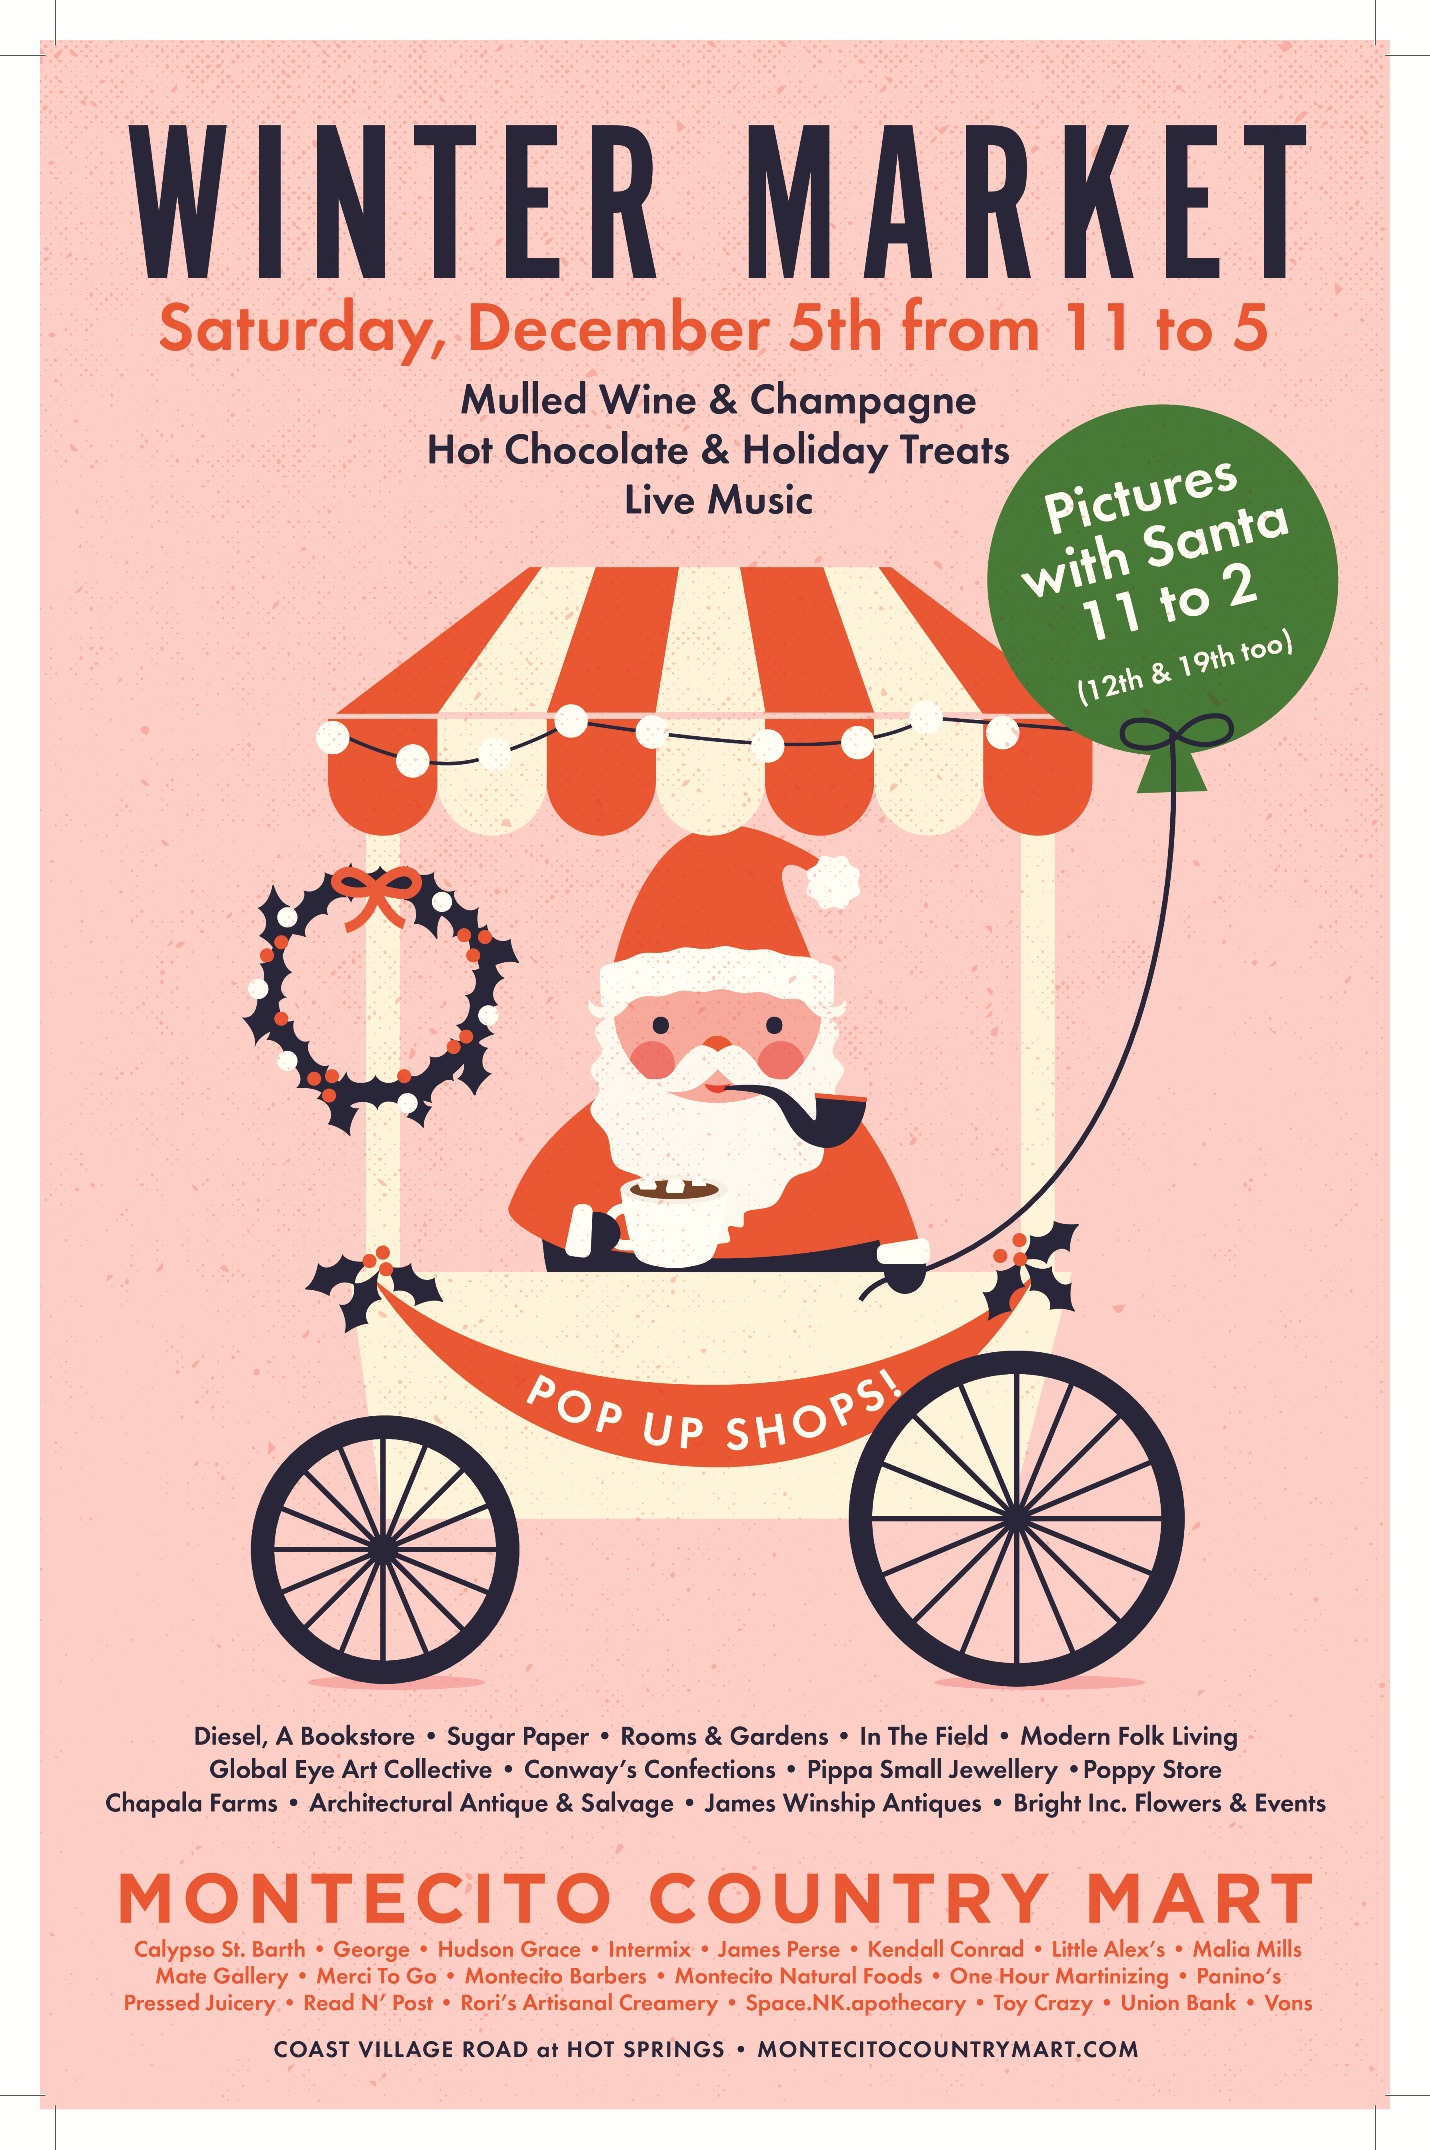 The Winter Market at Montecito Country Mart welcomes all on December 5